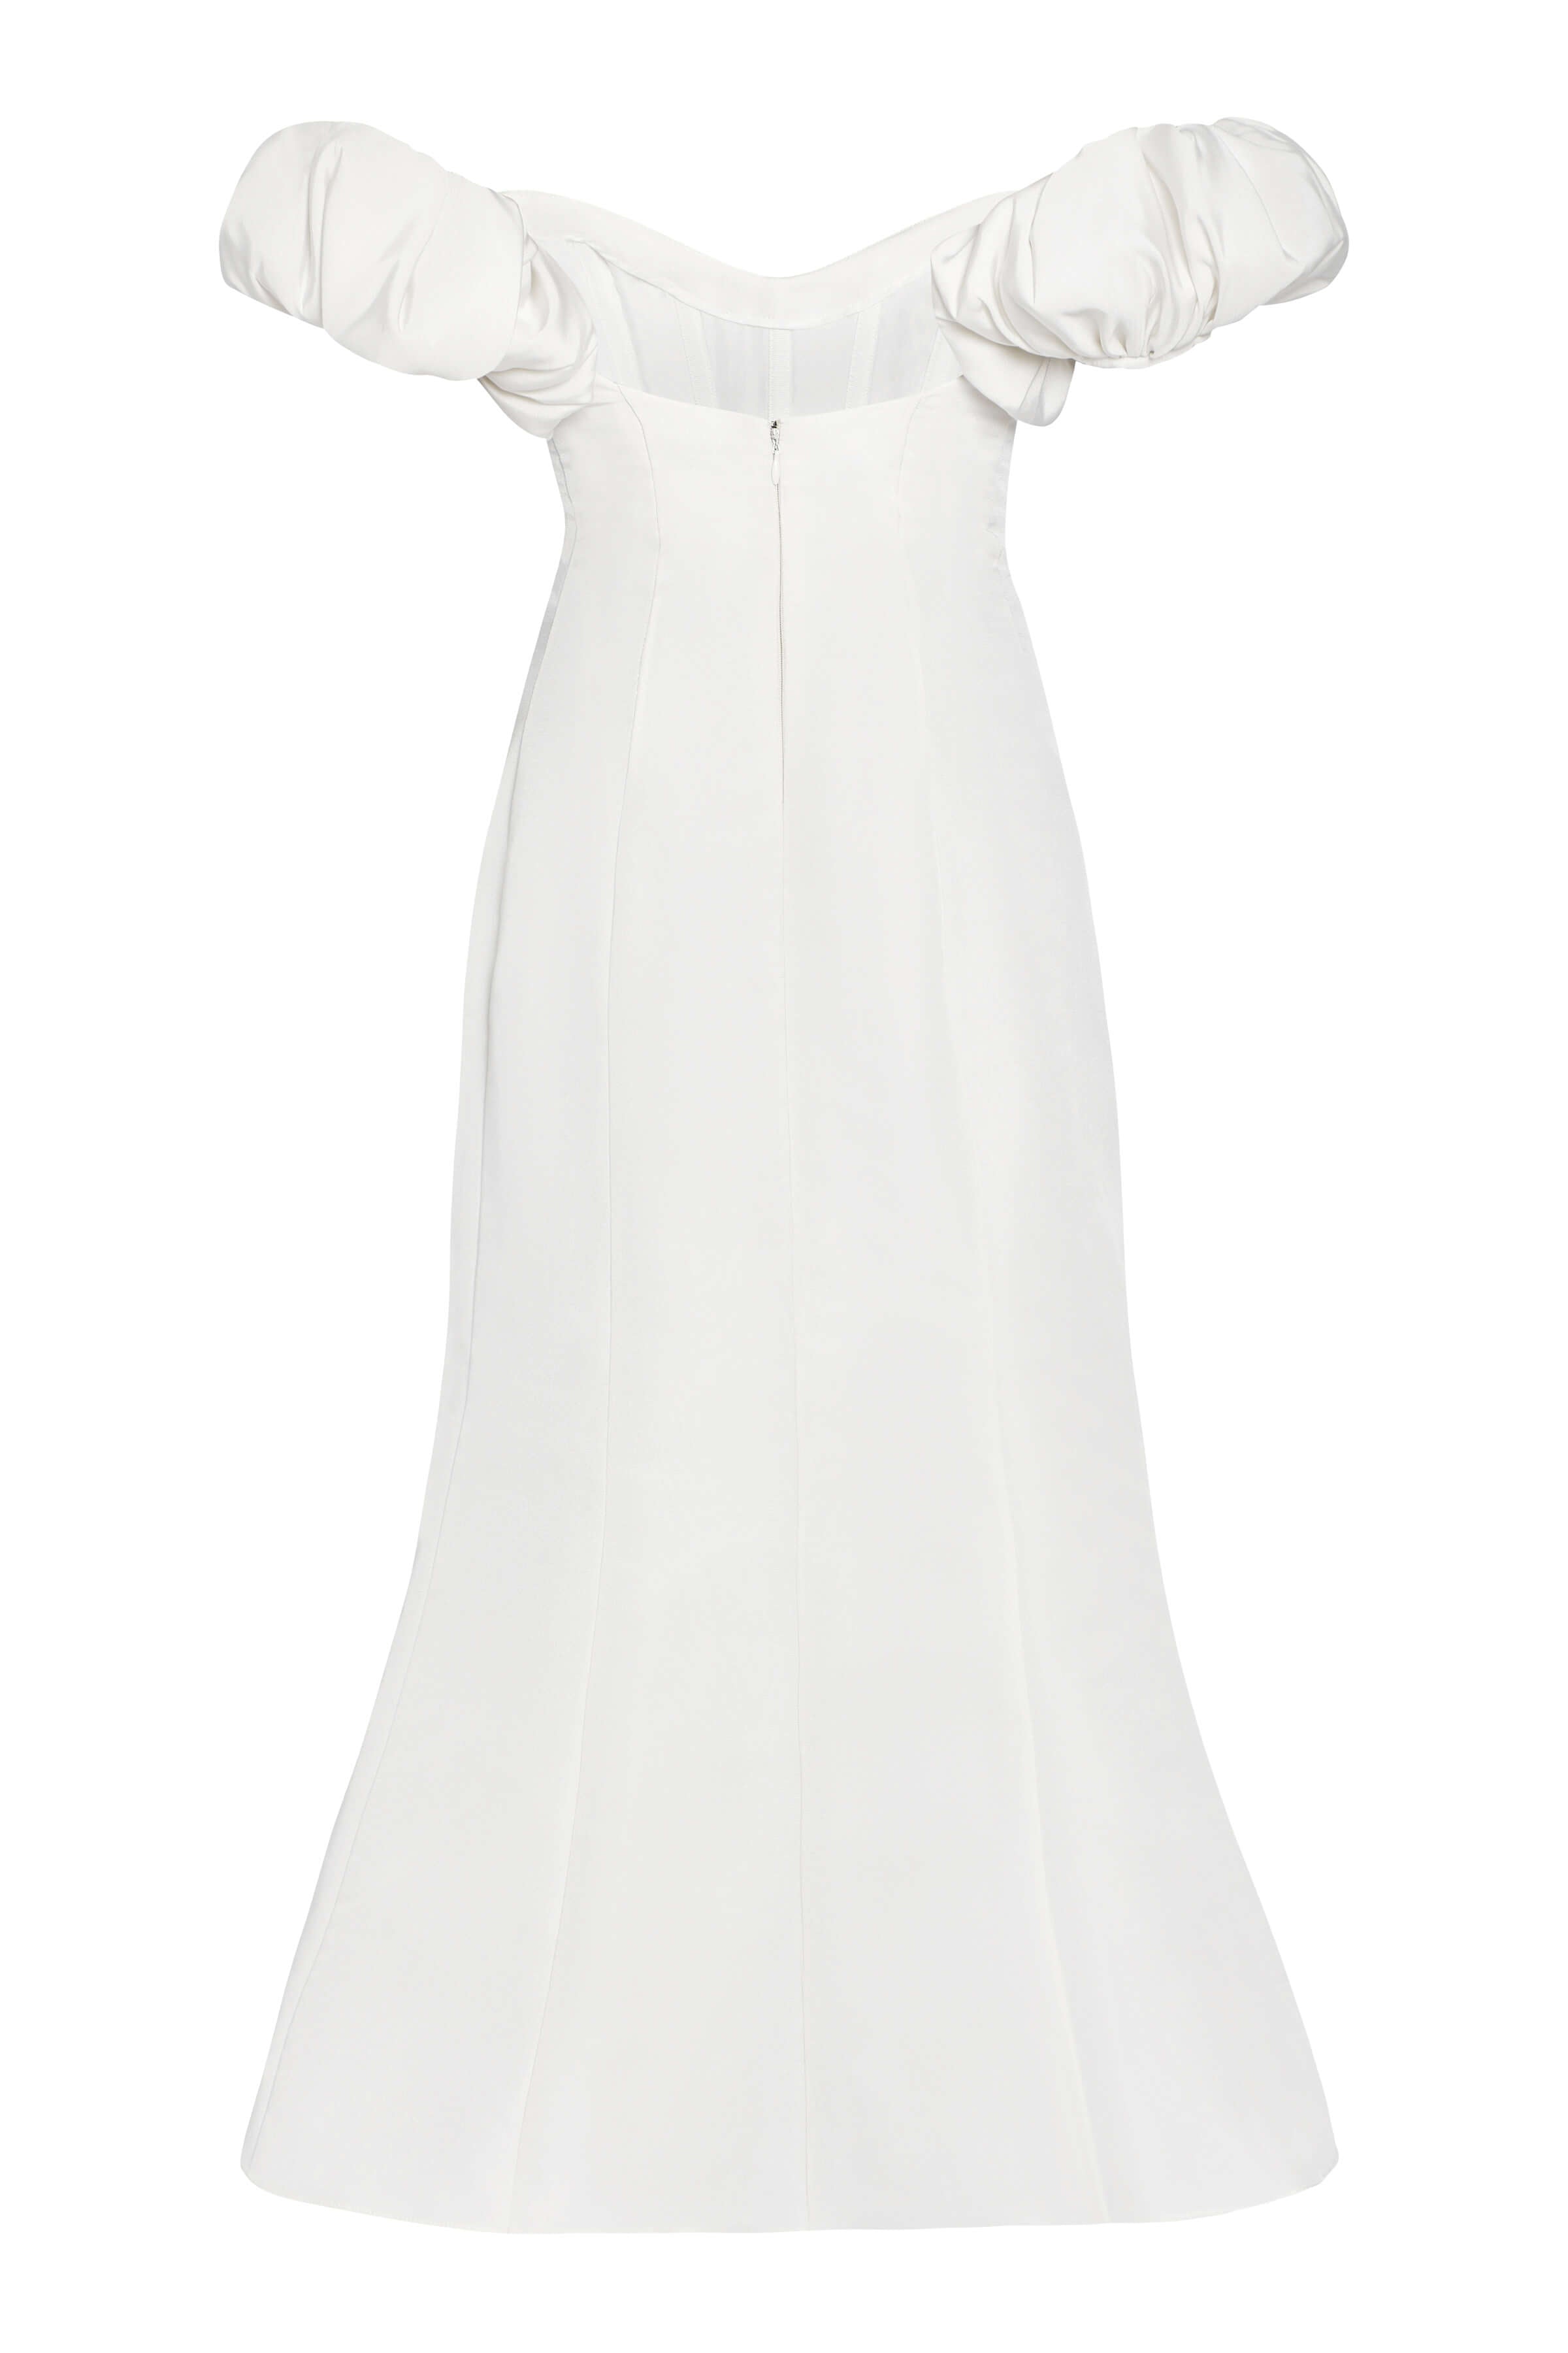 Maria White Silk Dress with Puff Sleeves